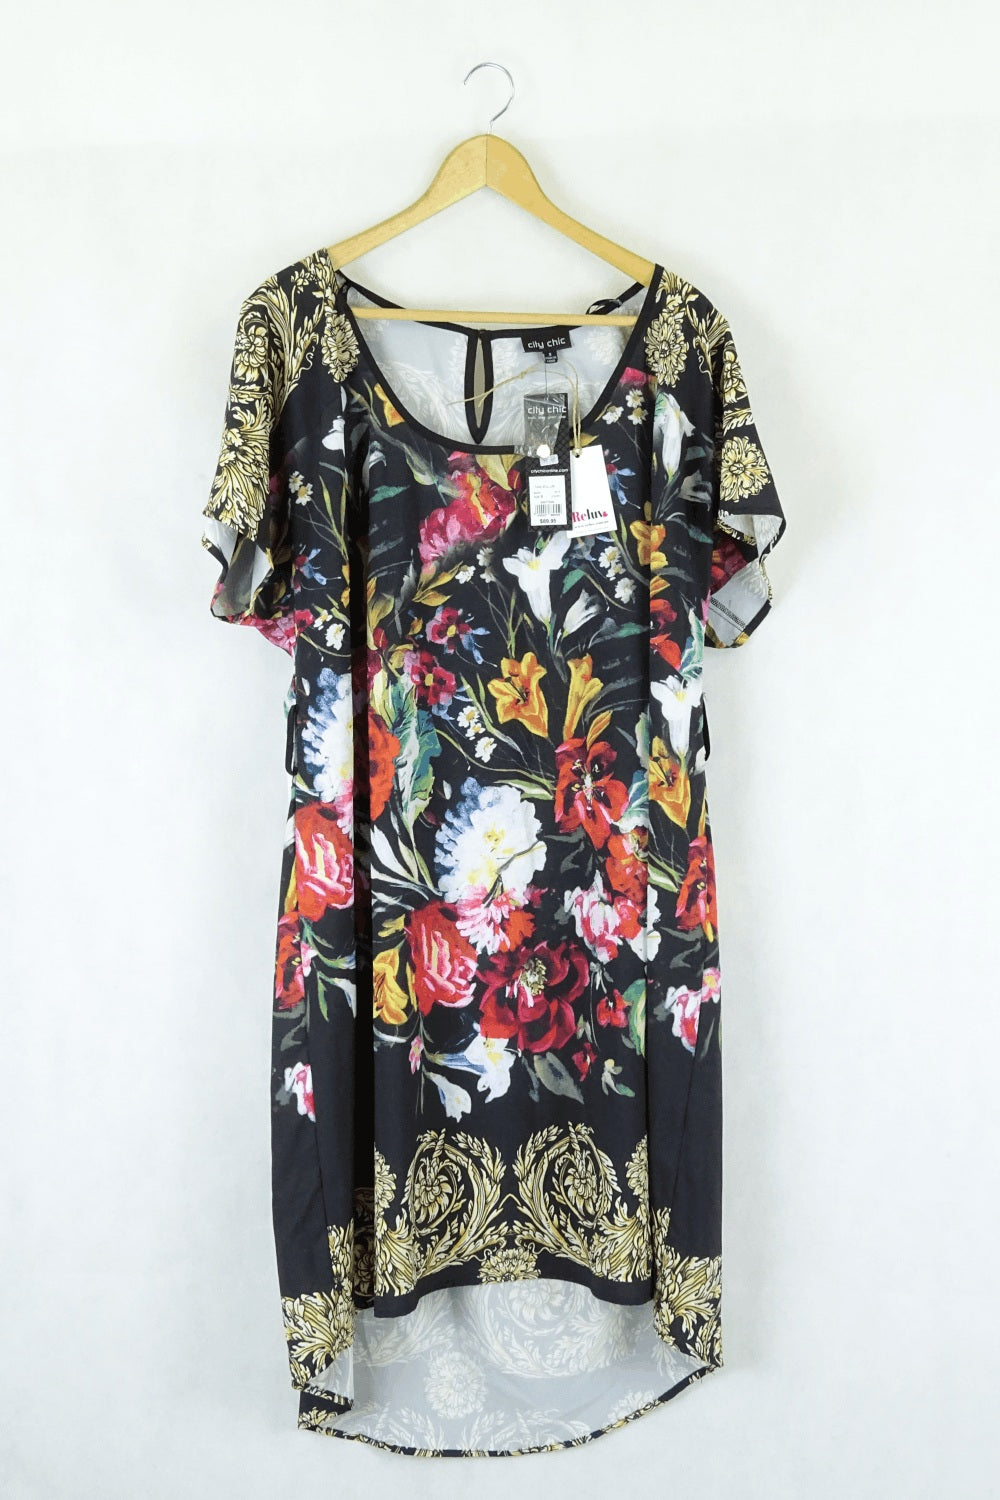 City Chic Multi-Coloured Floral Printed Tunic Dress S